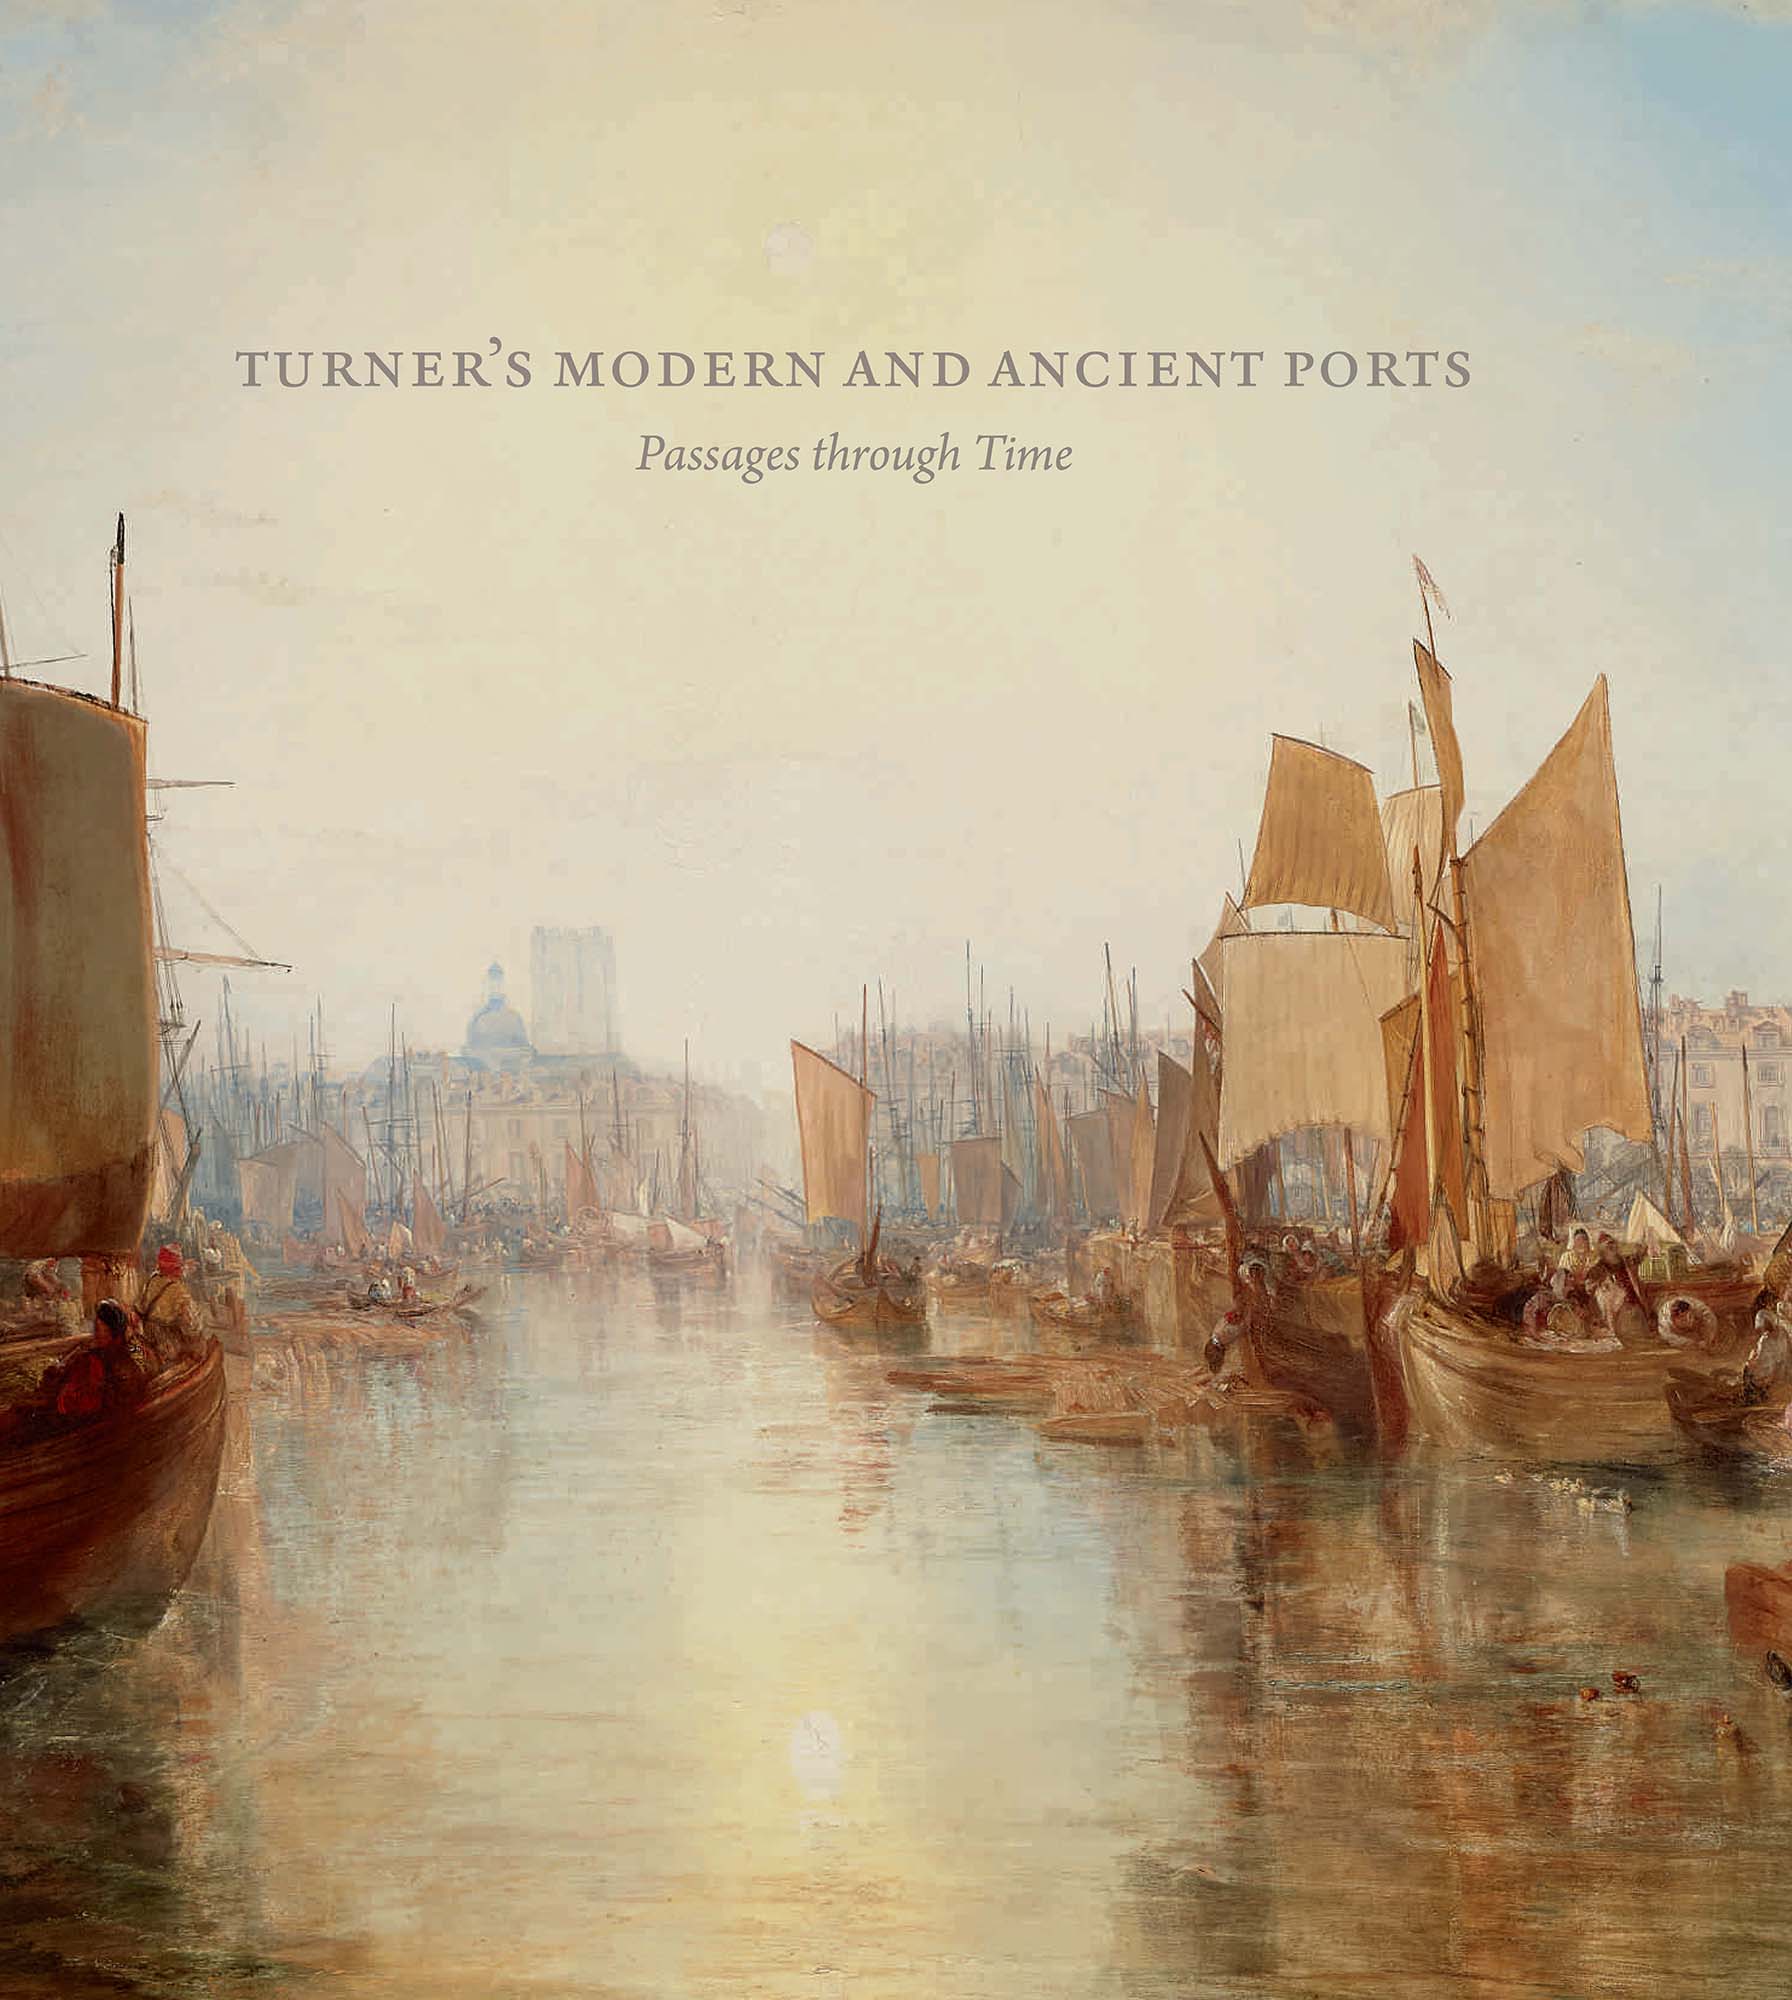 Turner painting of the Harbor of Dieppe, catalogue cover